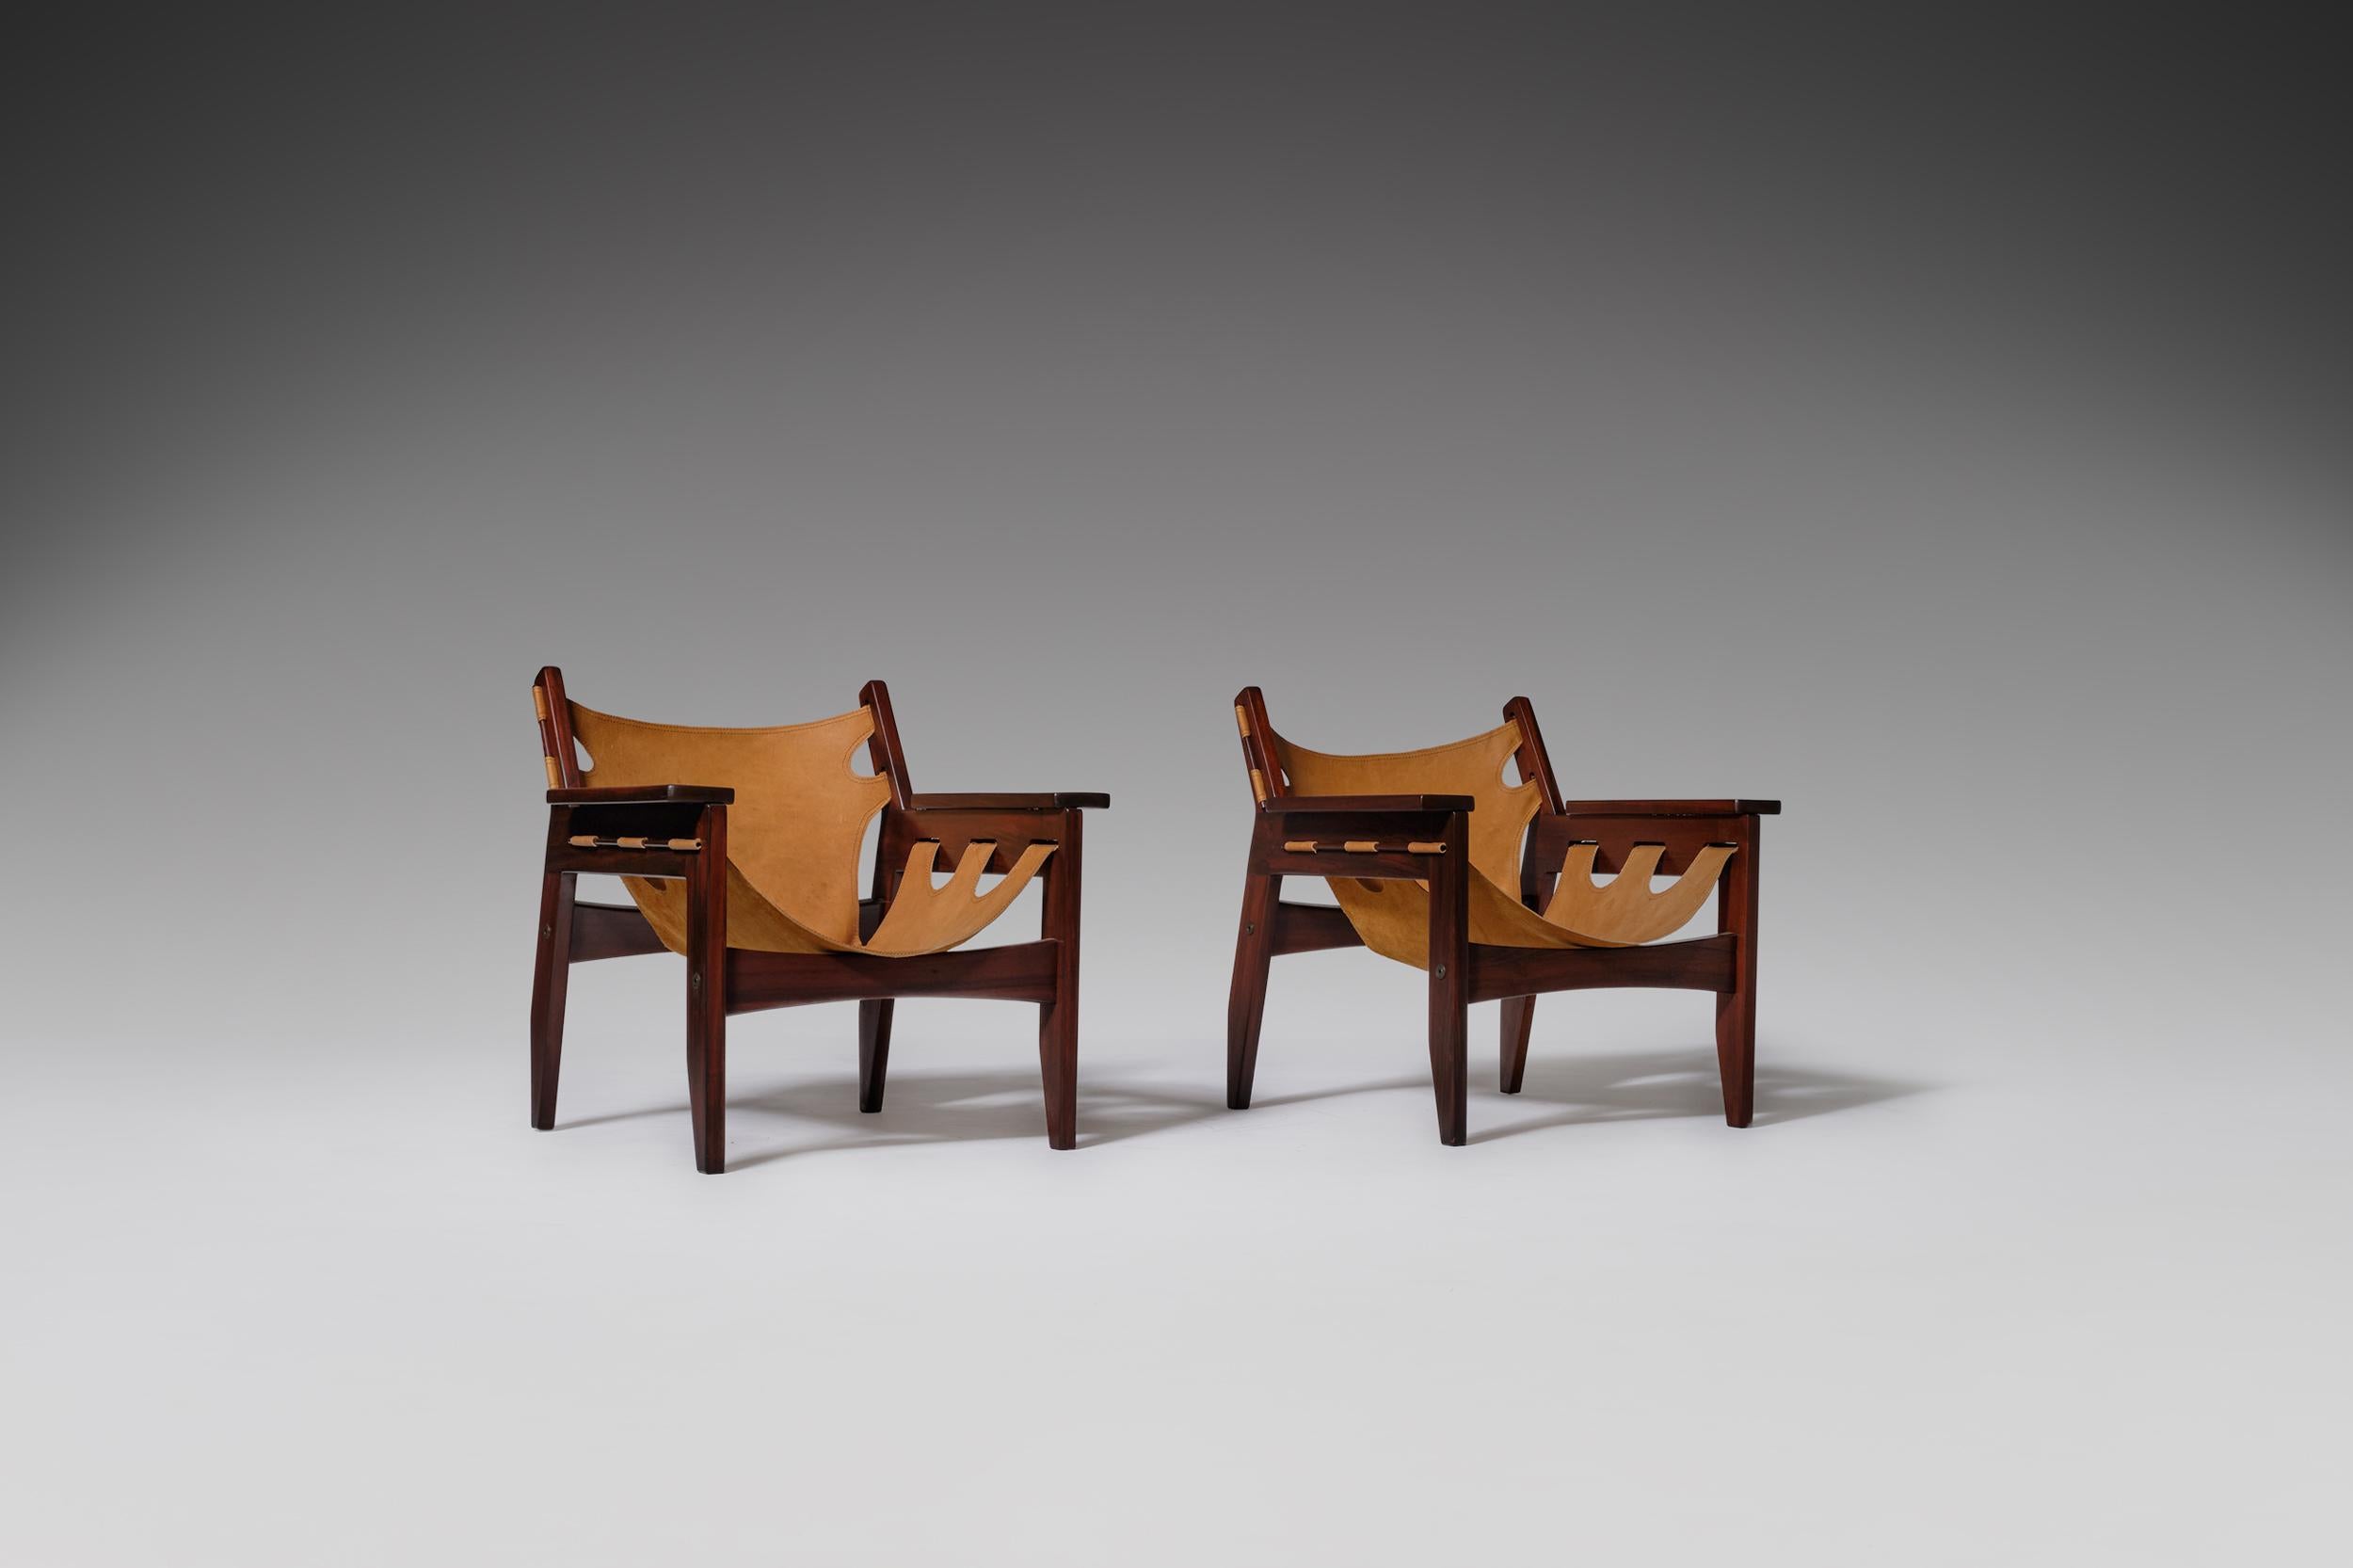 Leather Sergio Rodrigues ‘Kilin’ Chairs for Oca, Brazil, 1970s